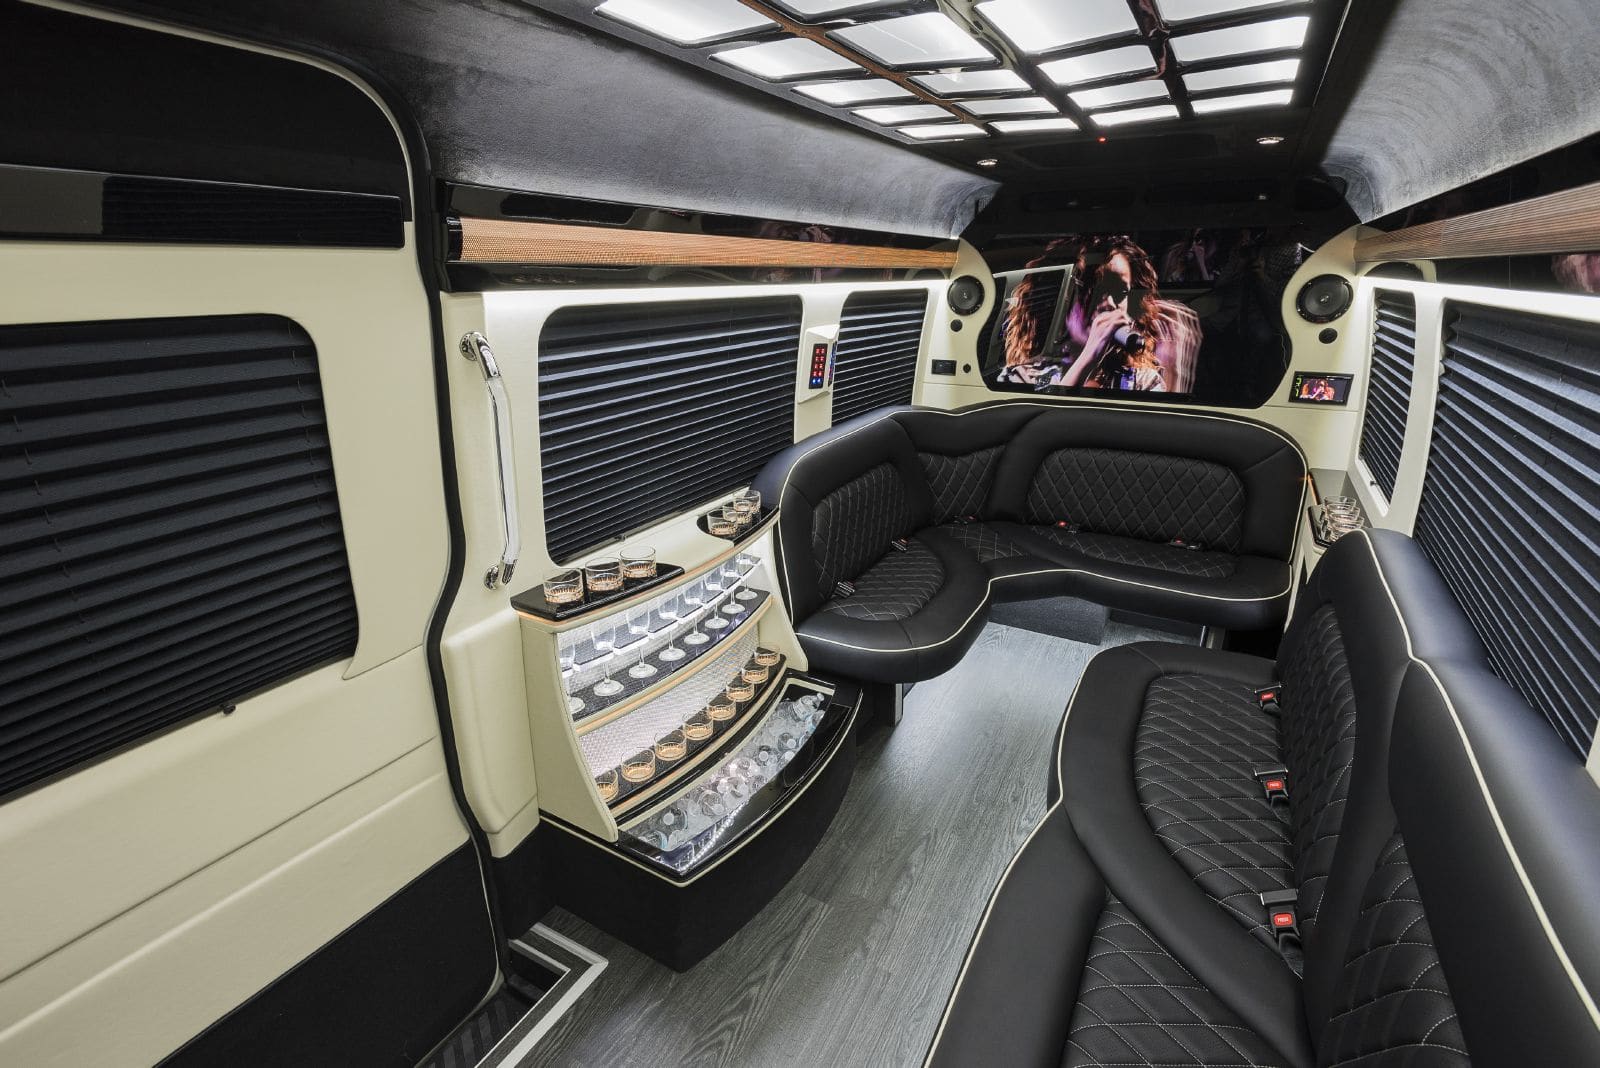 Custom interior, black leather seats, drink cooler, tvs, and more in the Mercedes Sprinter Limo.